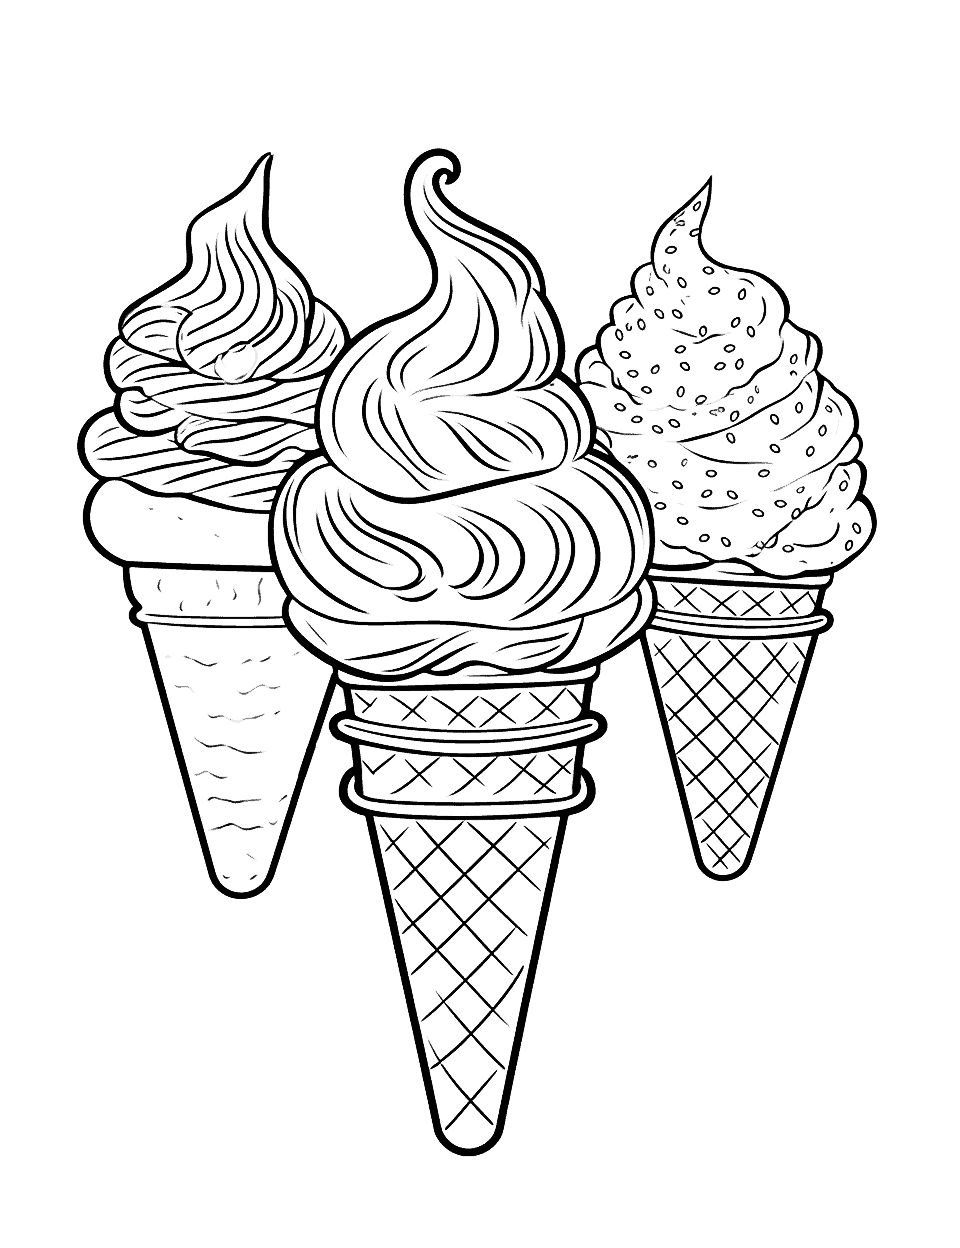 Cool Ice Cream Designs Coloring Page - Contemporary and cool designs of ice creams